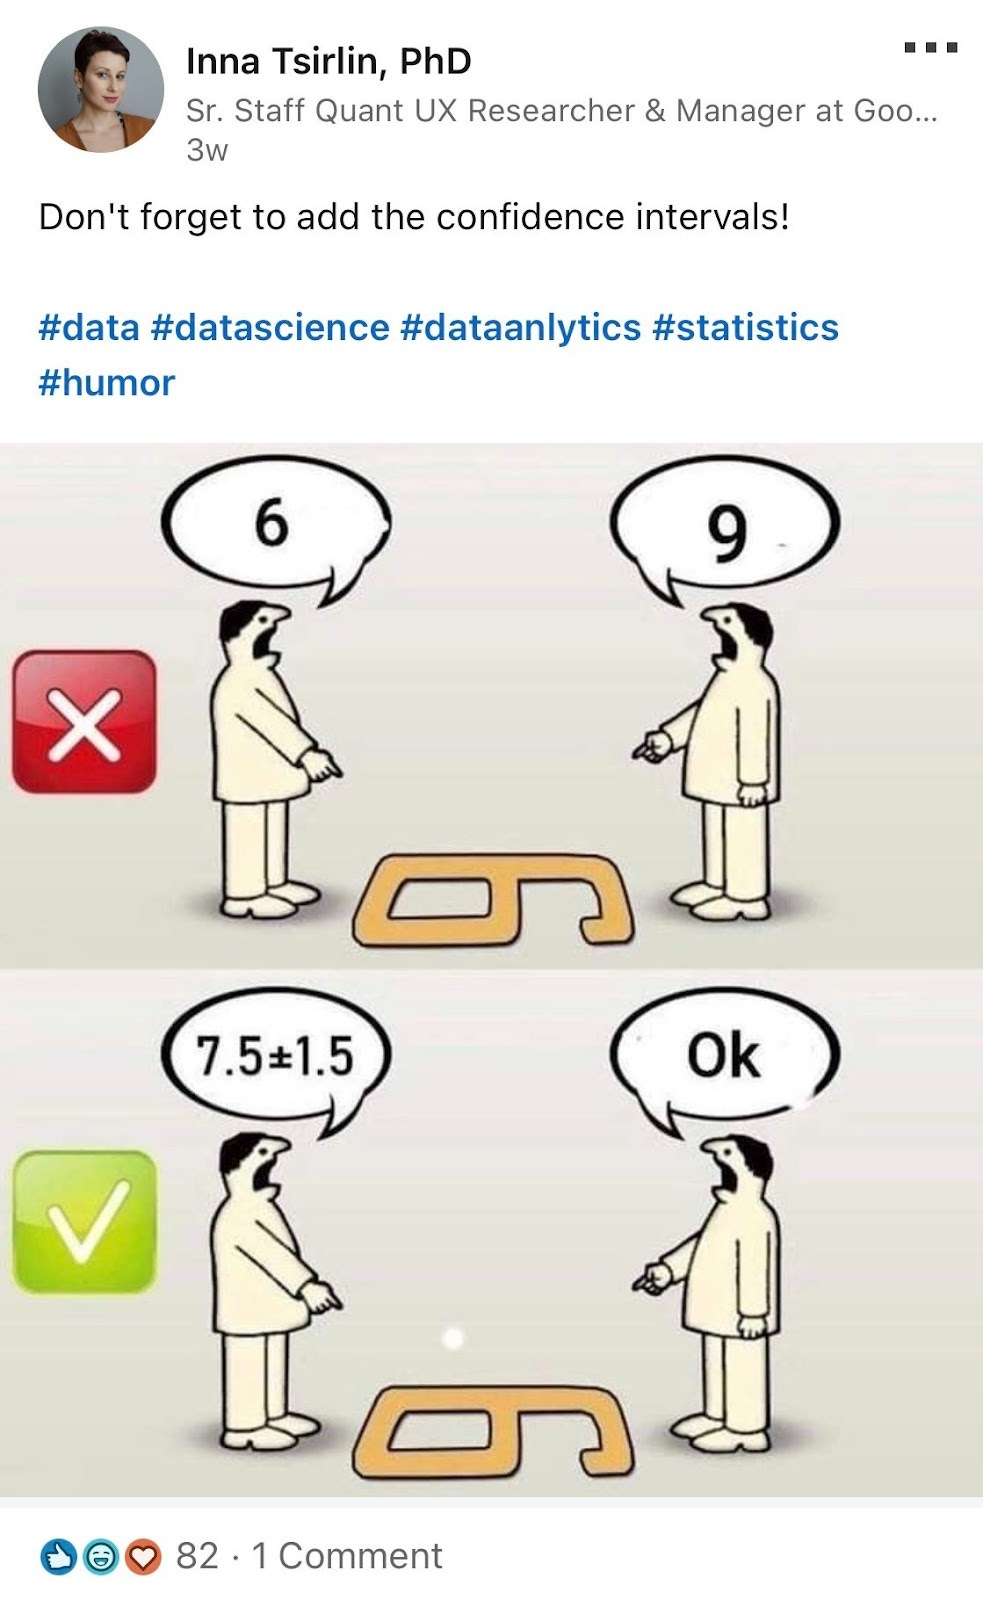 screencap of a LinkedIn post. Text: "Don't forget to include confidence intervals!" Includes a cartoon with two panels. In the first panel, two people standing on opposite ends of a numeral argue whether it's a 6 or a 9. In the second panel, one person says "7.5±1.5" and the other says "Ok"